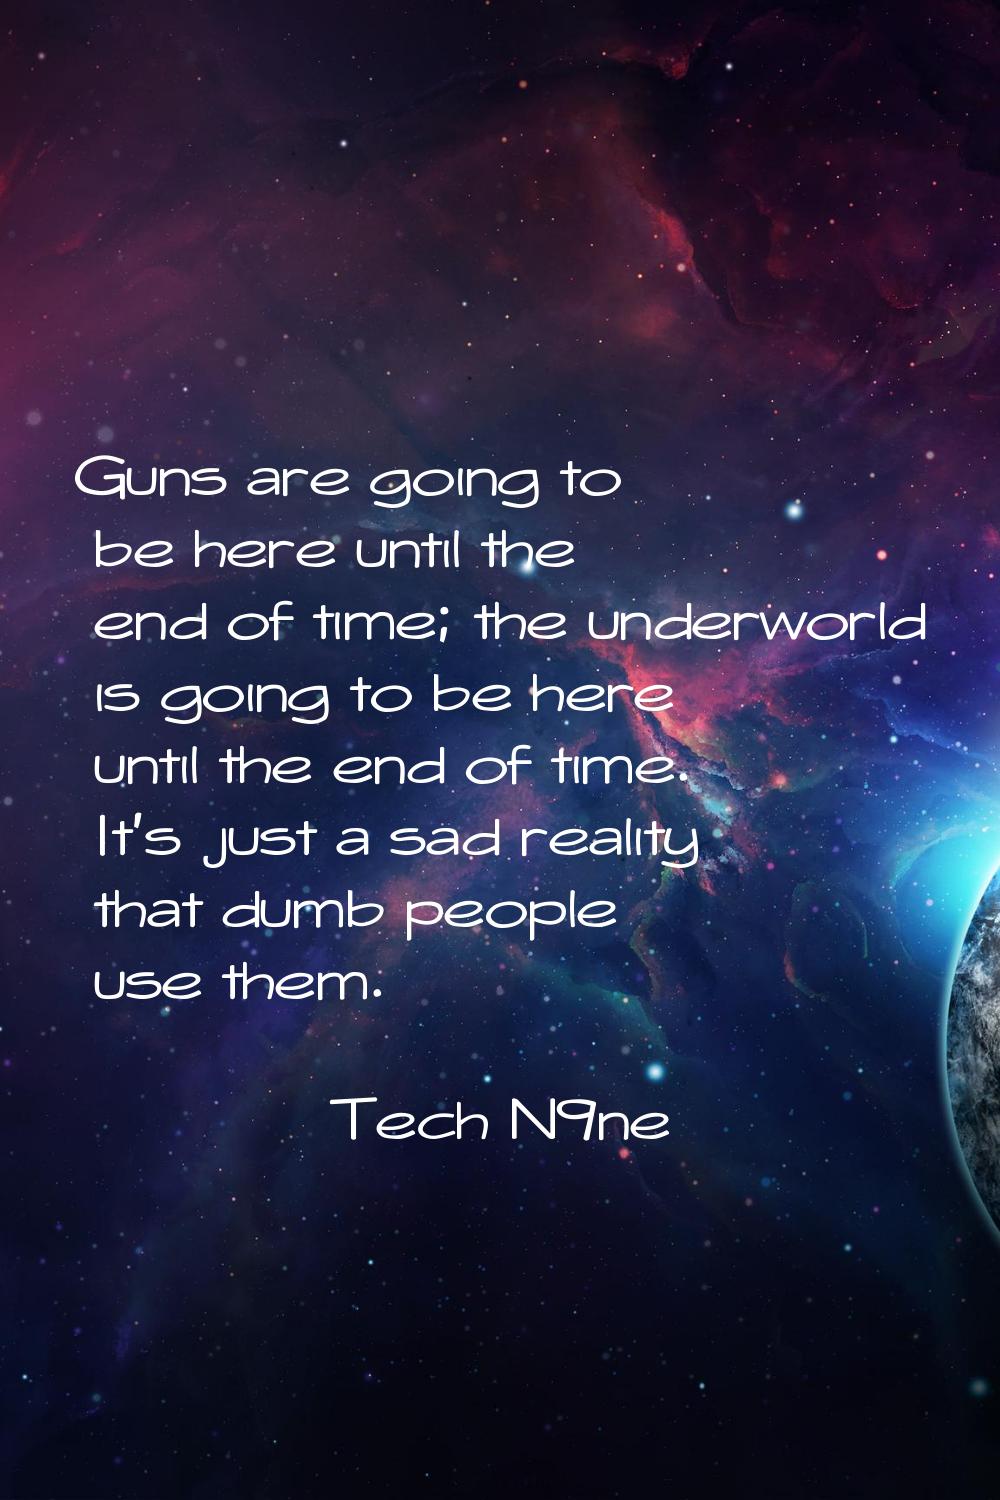 Guns are going to be here until the end of time; the underworld is going to be here until the end o